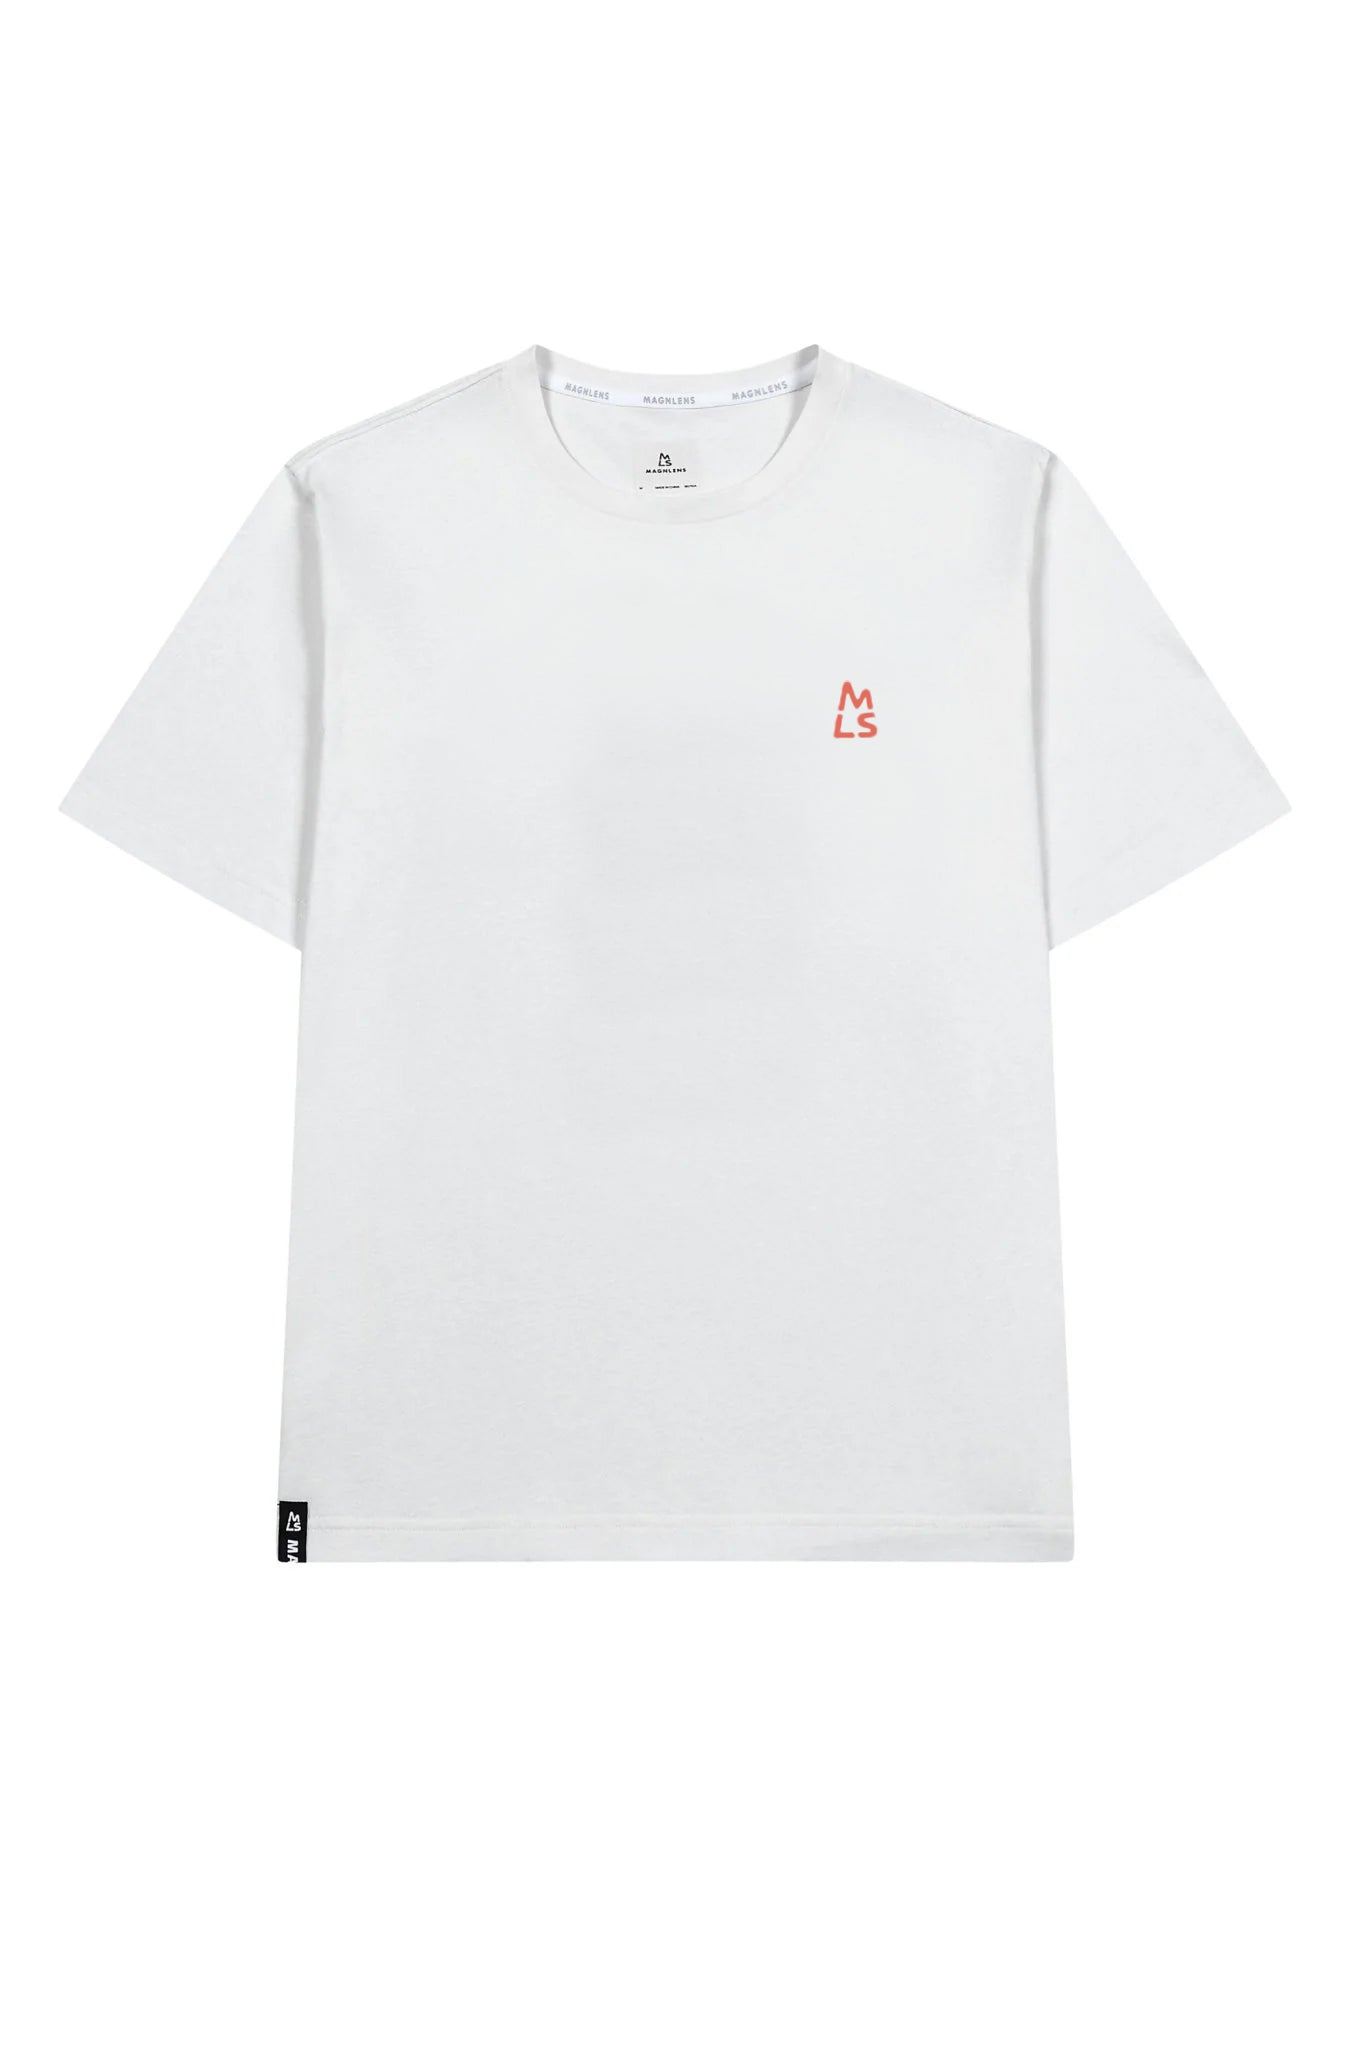 Relaxed Fit Graphic Tee - Magnlens